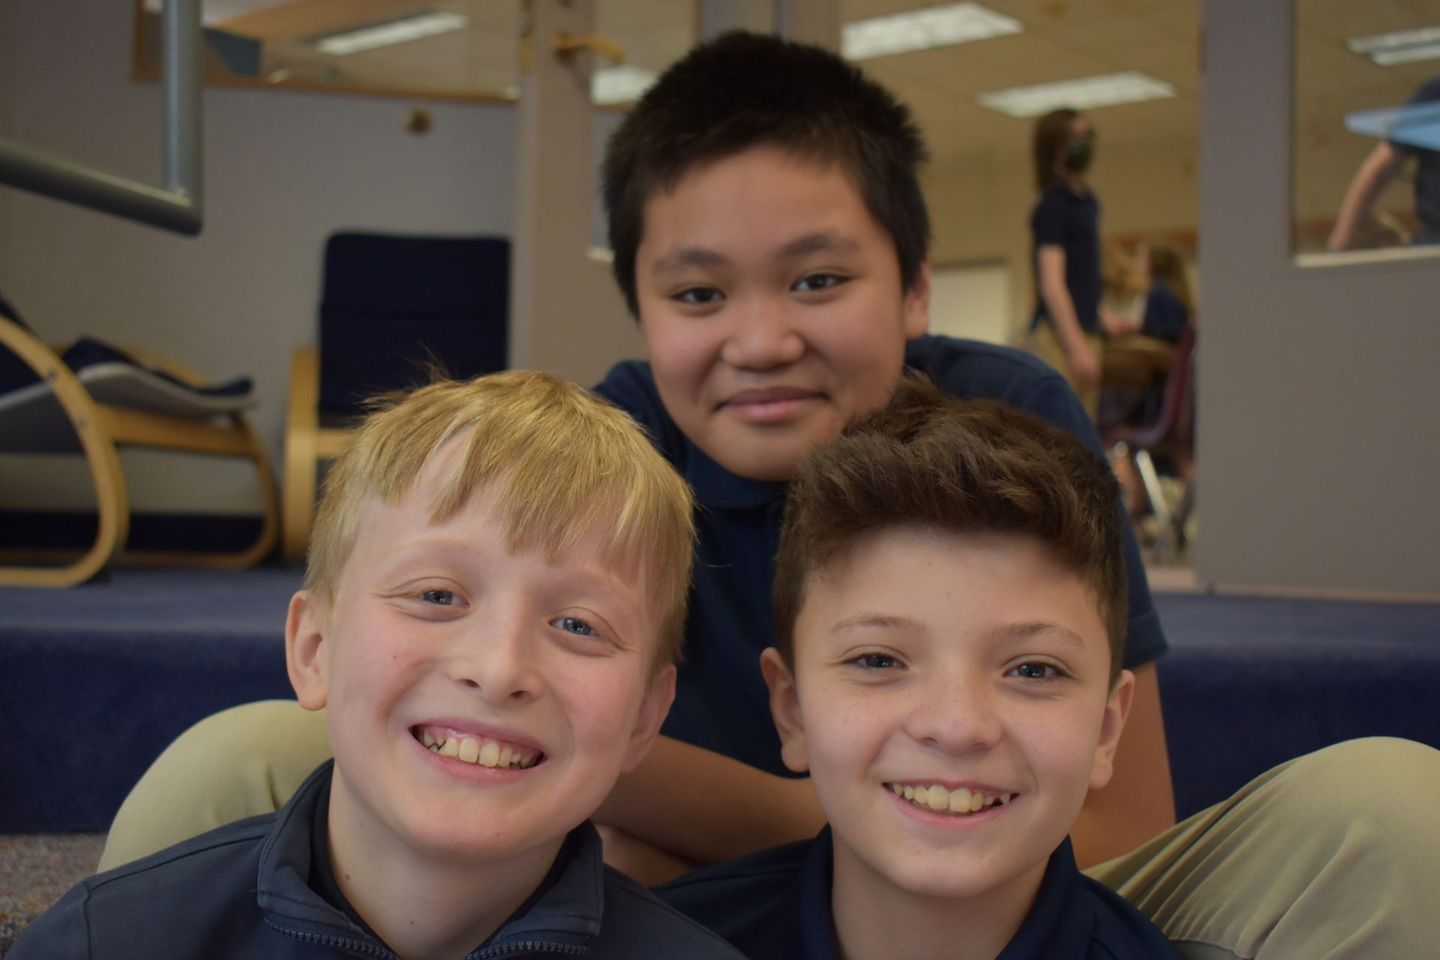 Three young boys are posing for a picture and smiling for the camera